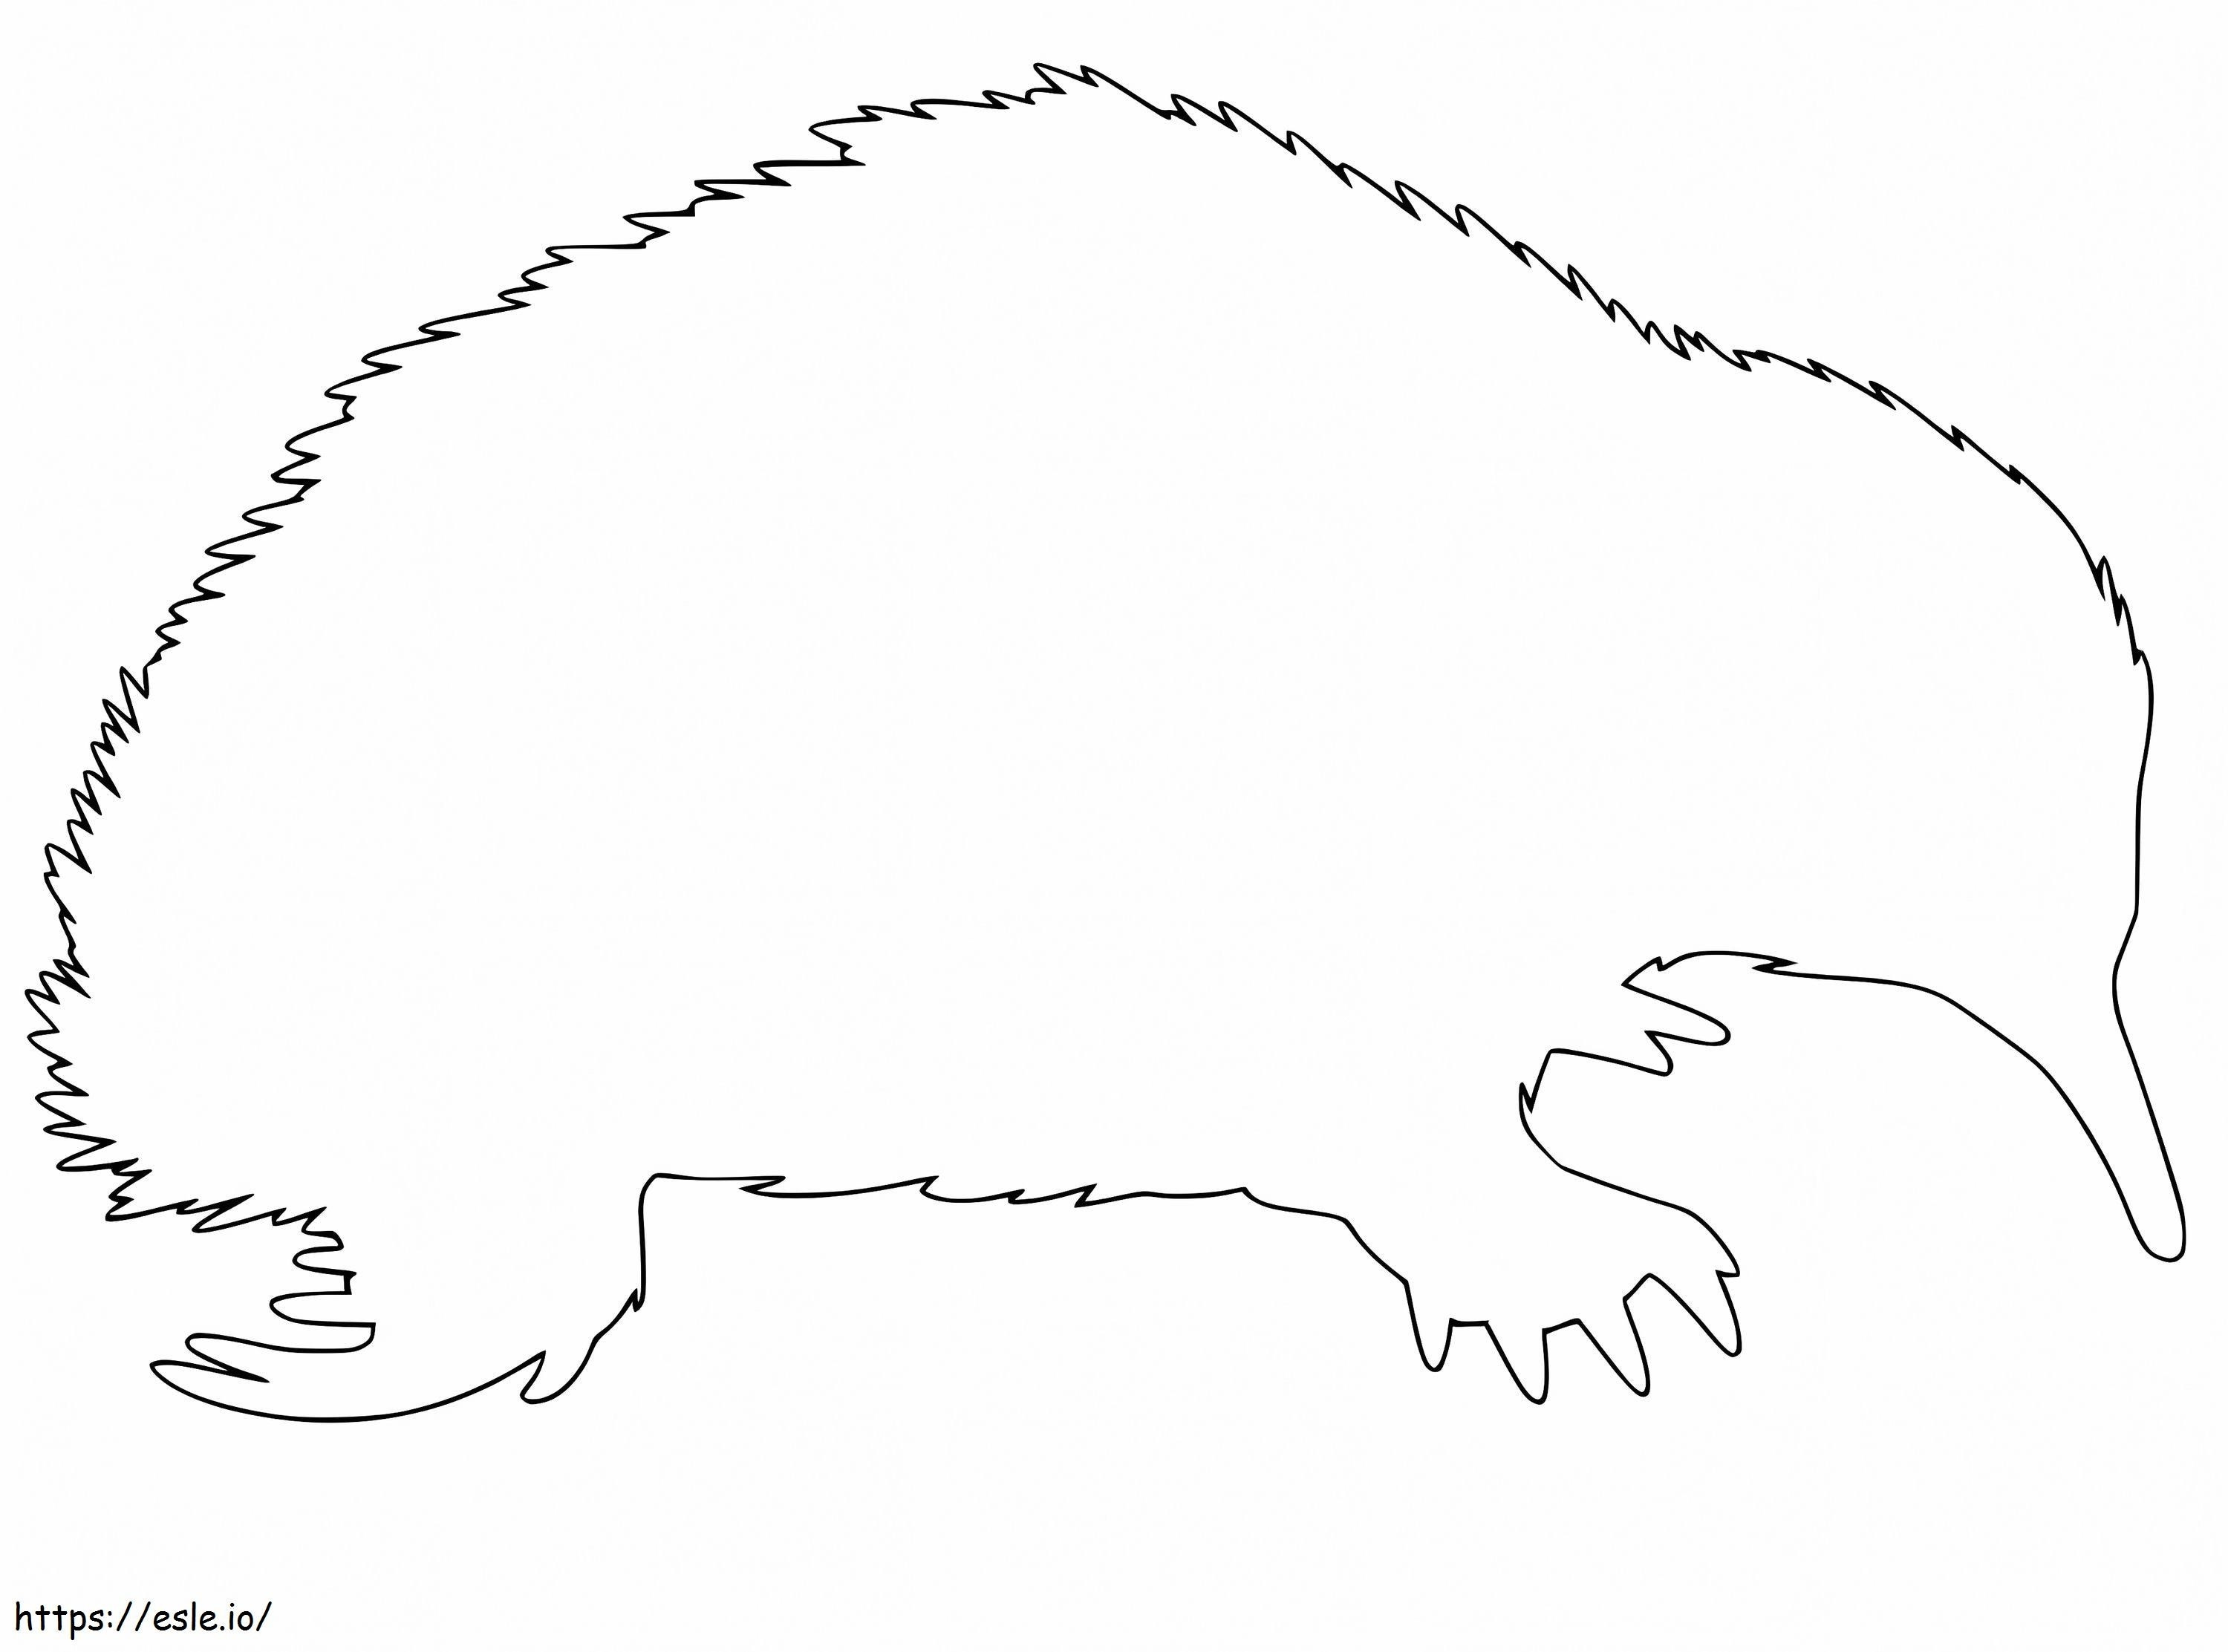 Echidna Outline coloring page